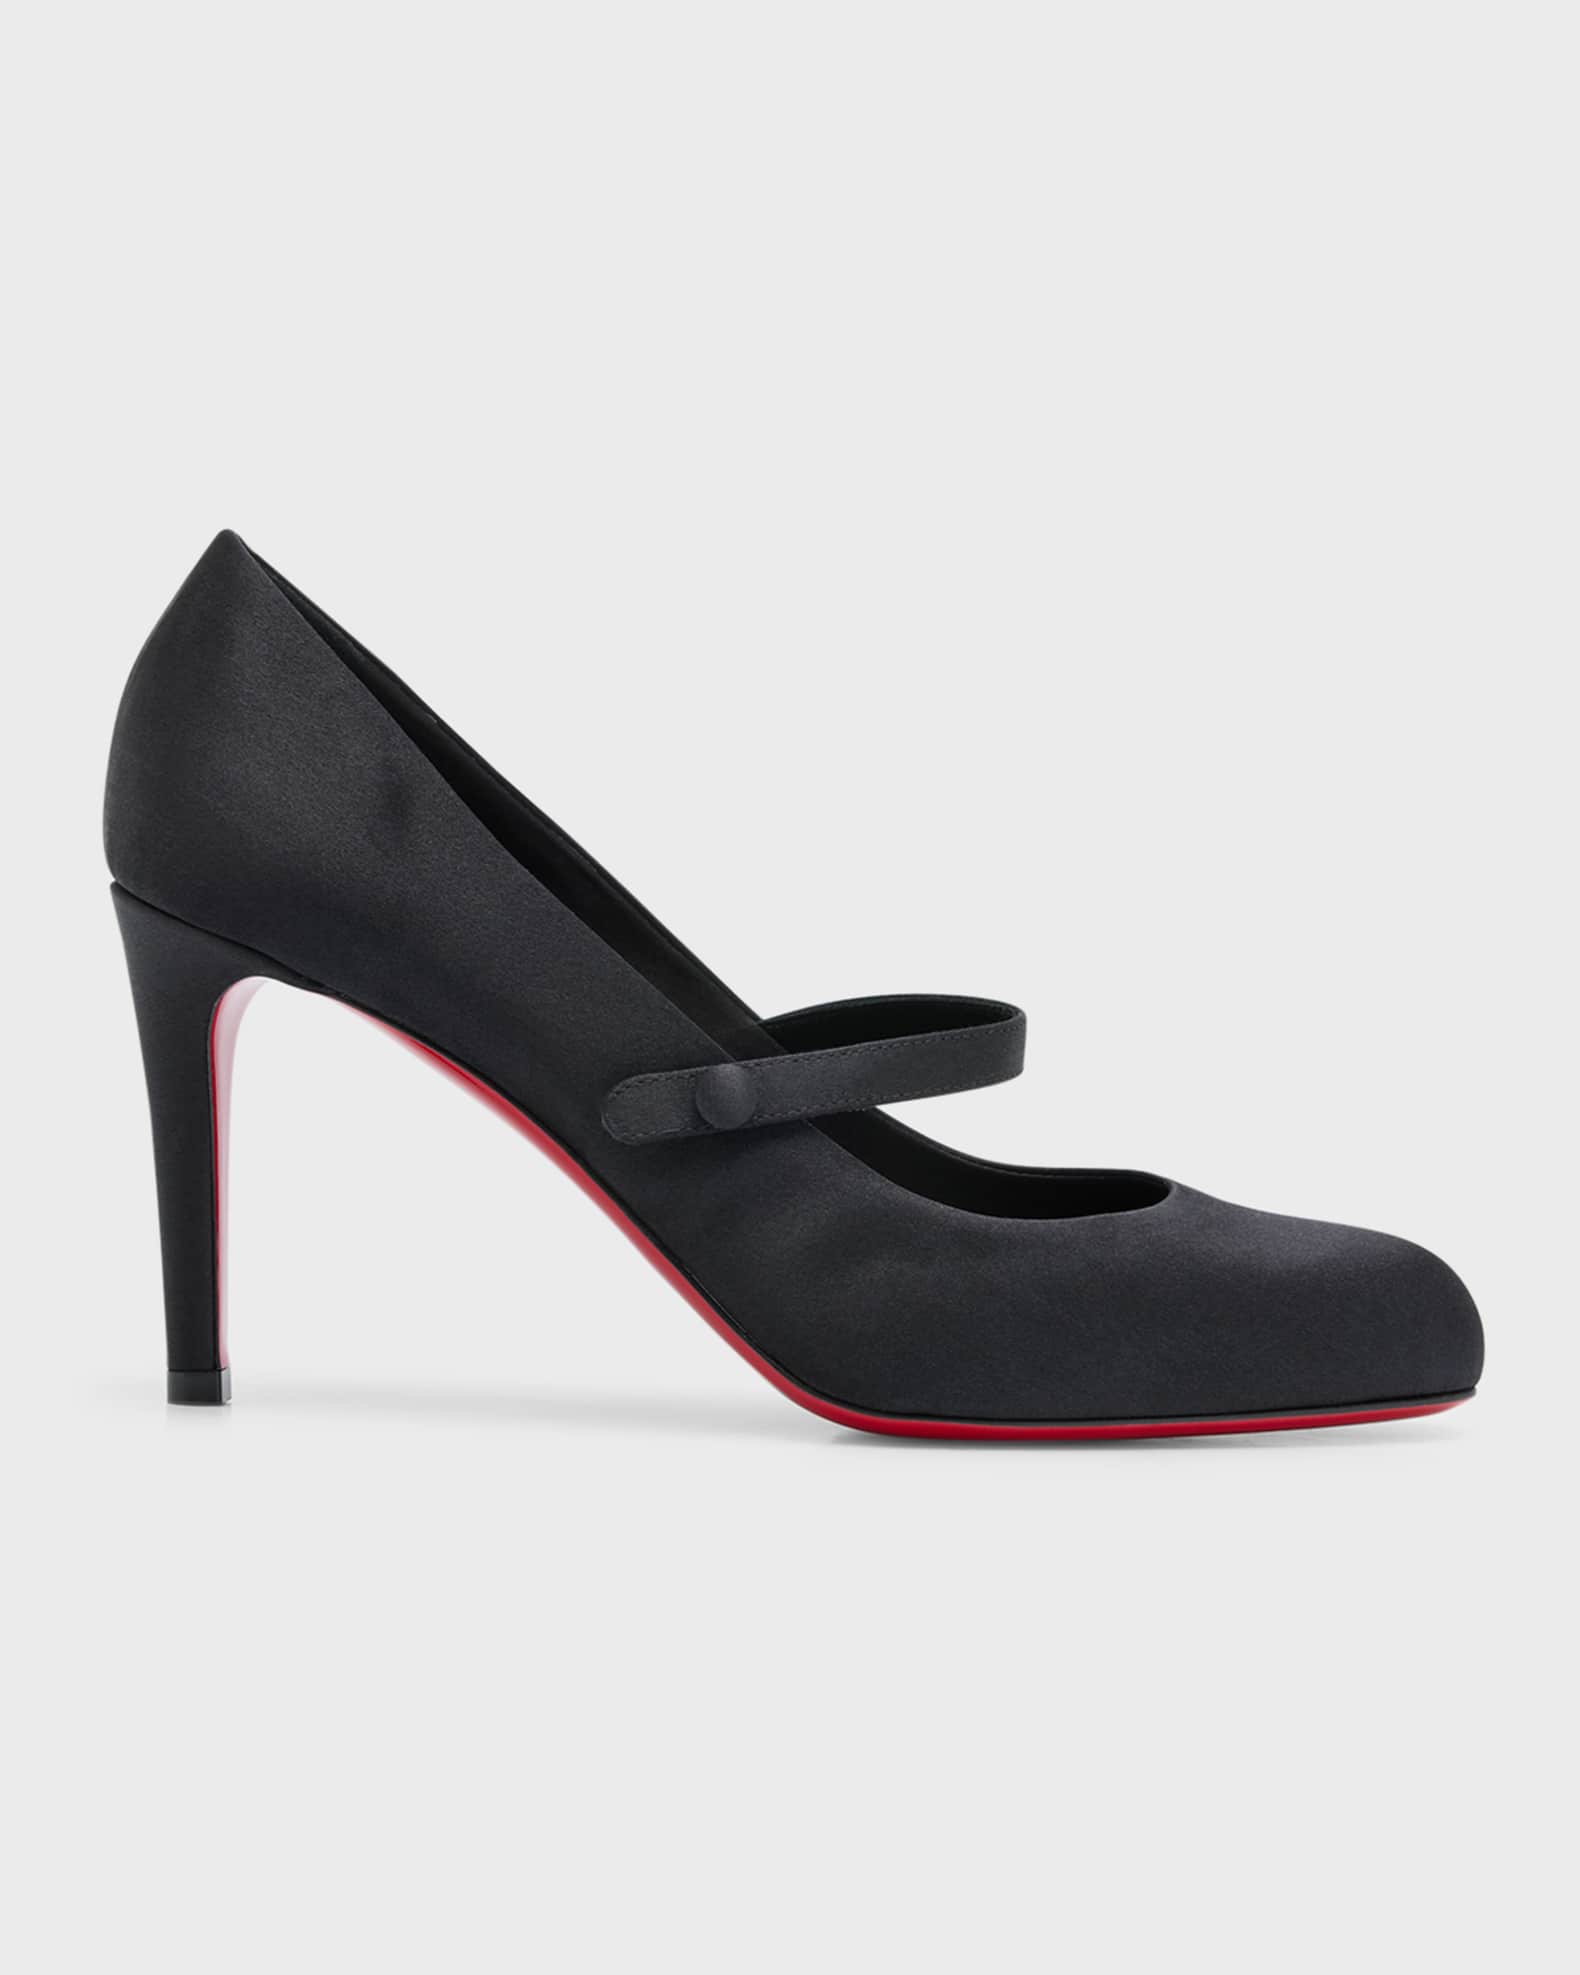 Christian Louboutin Pumppie Wallis Red Sole Crepe Satin Mary Jane Pumps ...